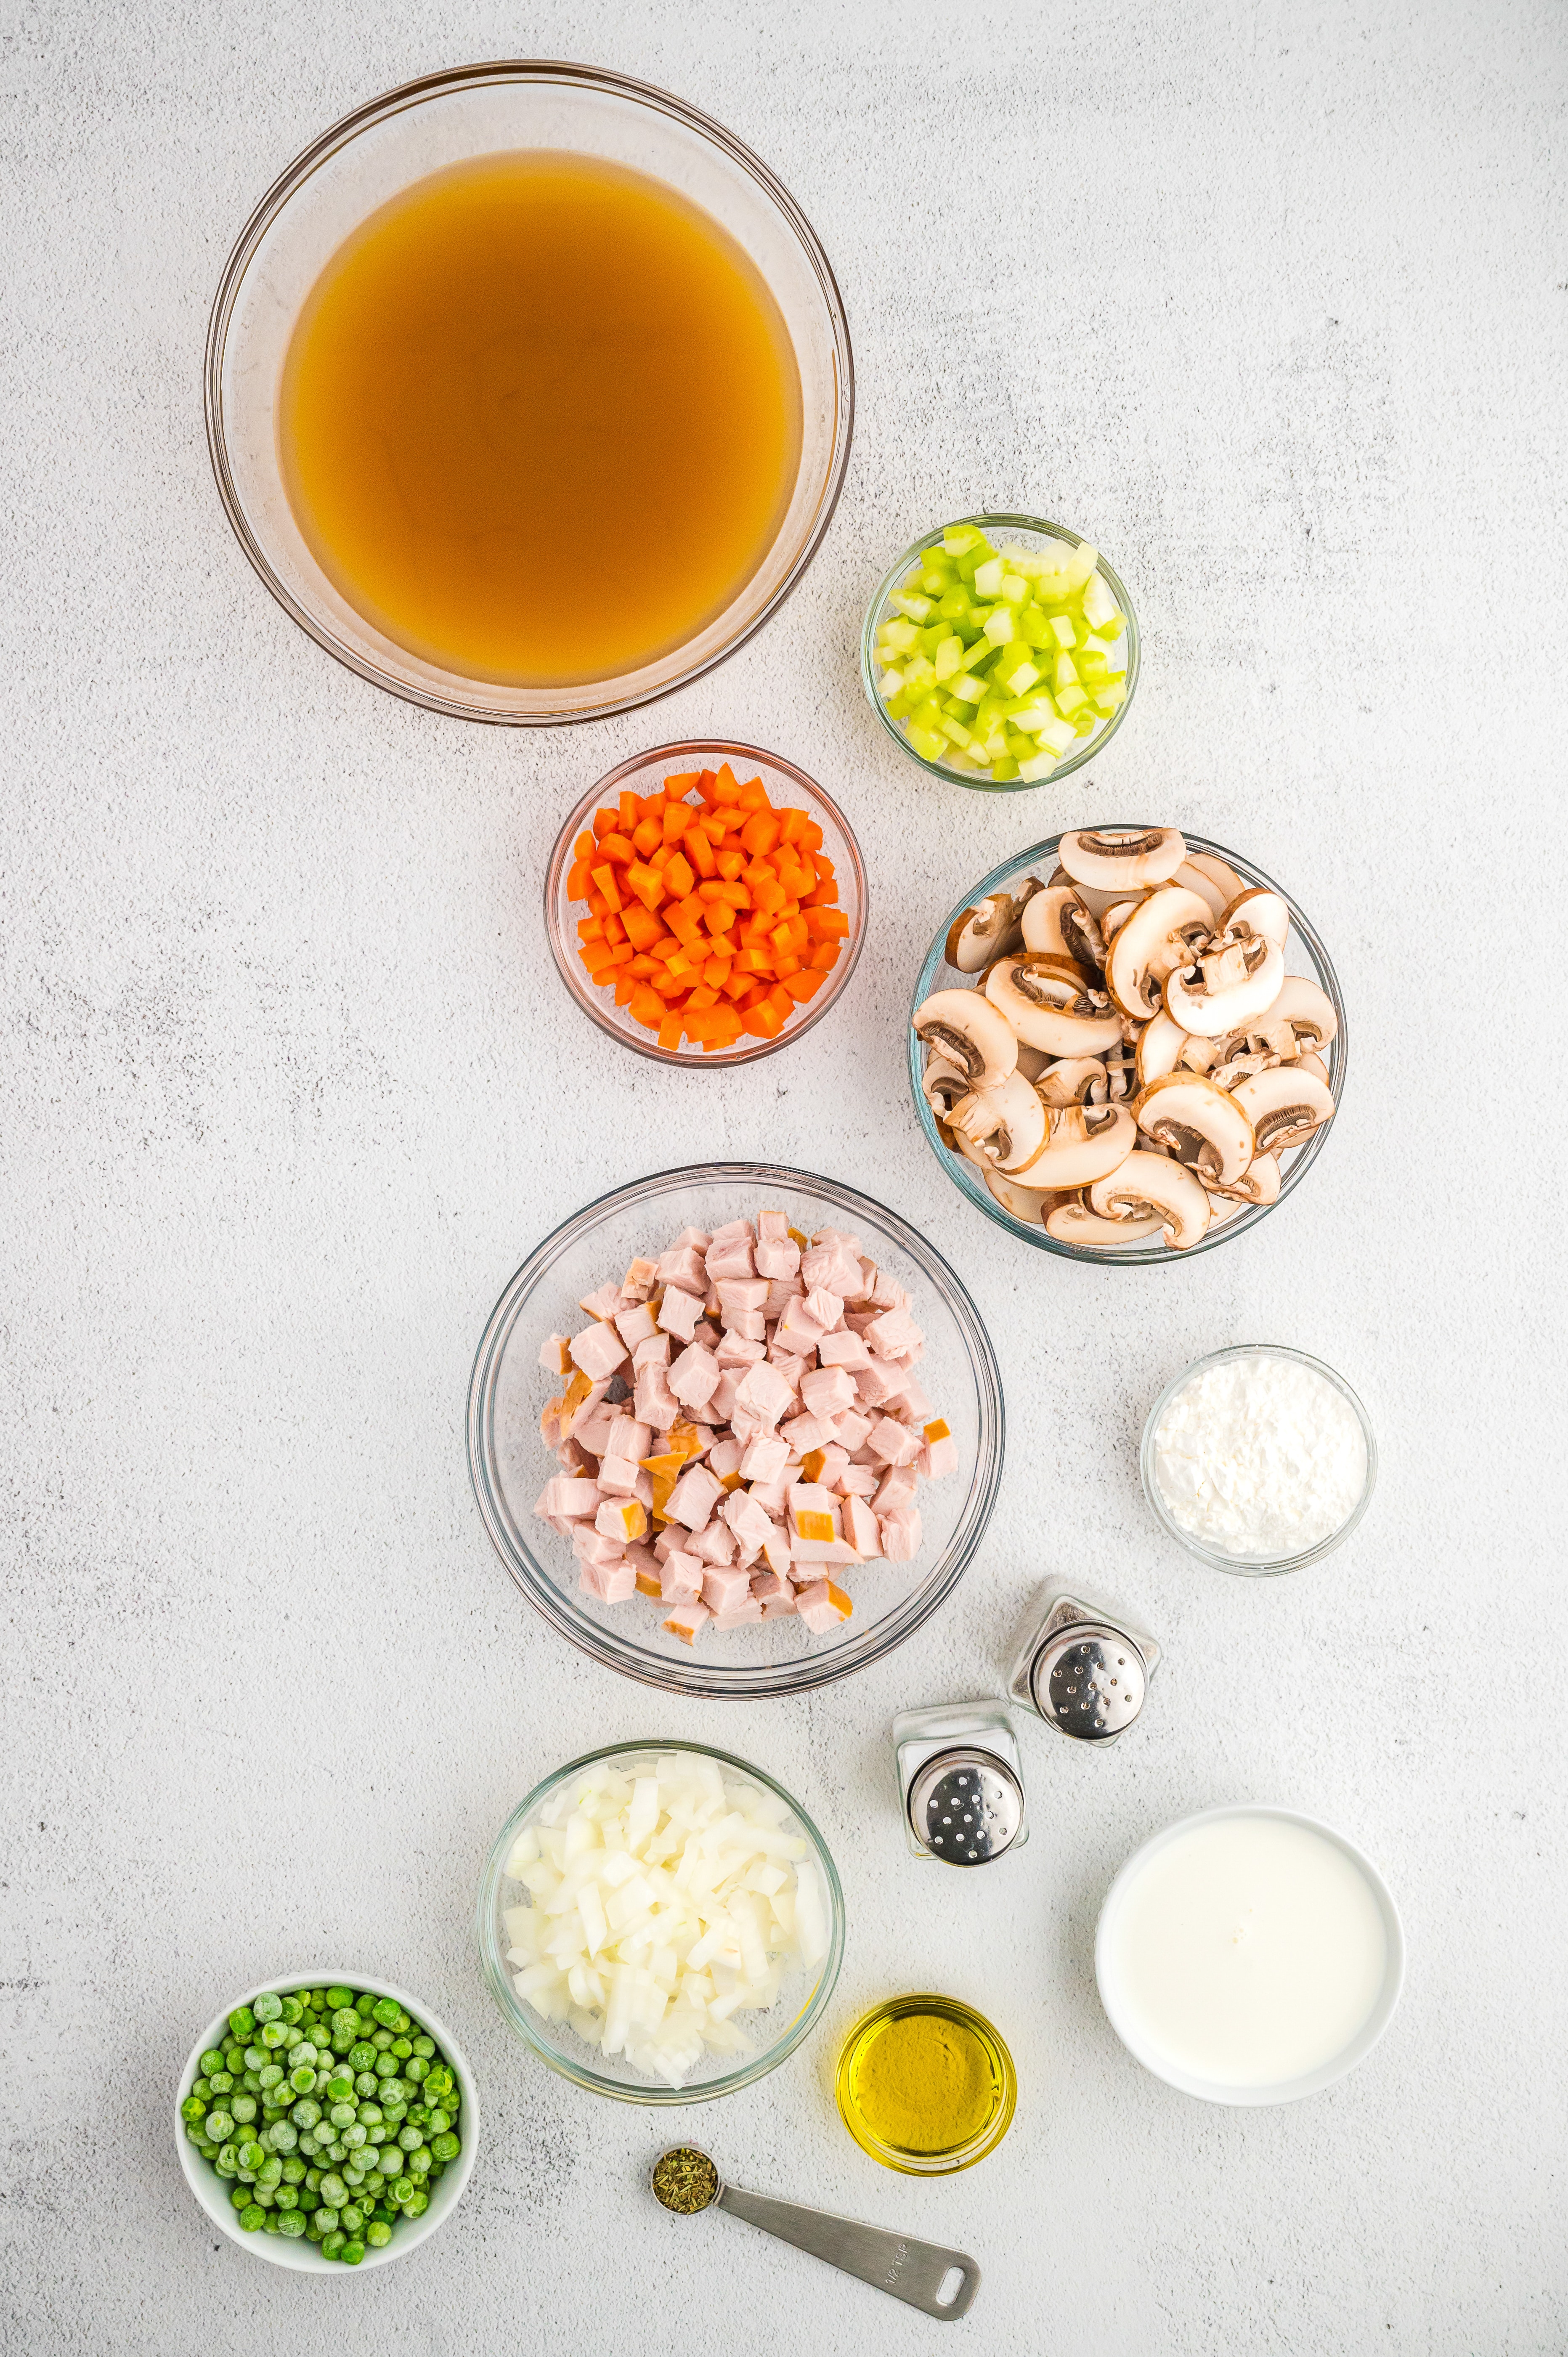 Measured ingredients needed for to make Turkey a la King presented in clear glass prep bowls.